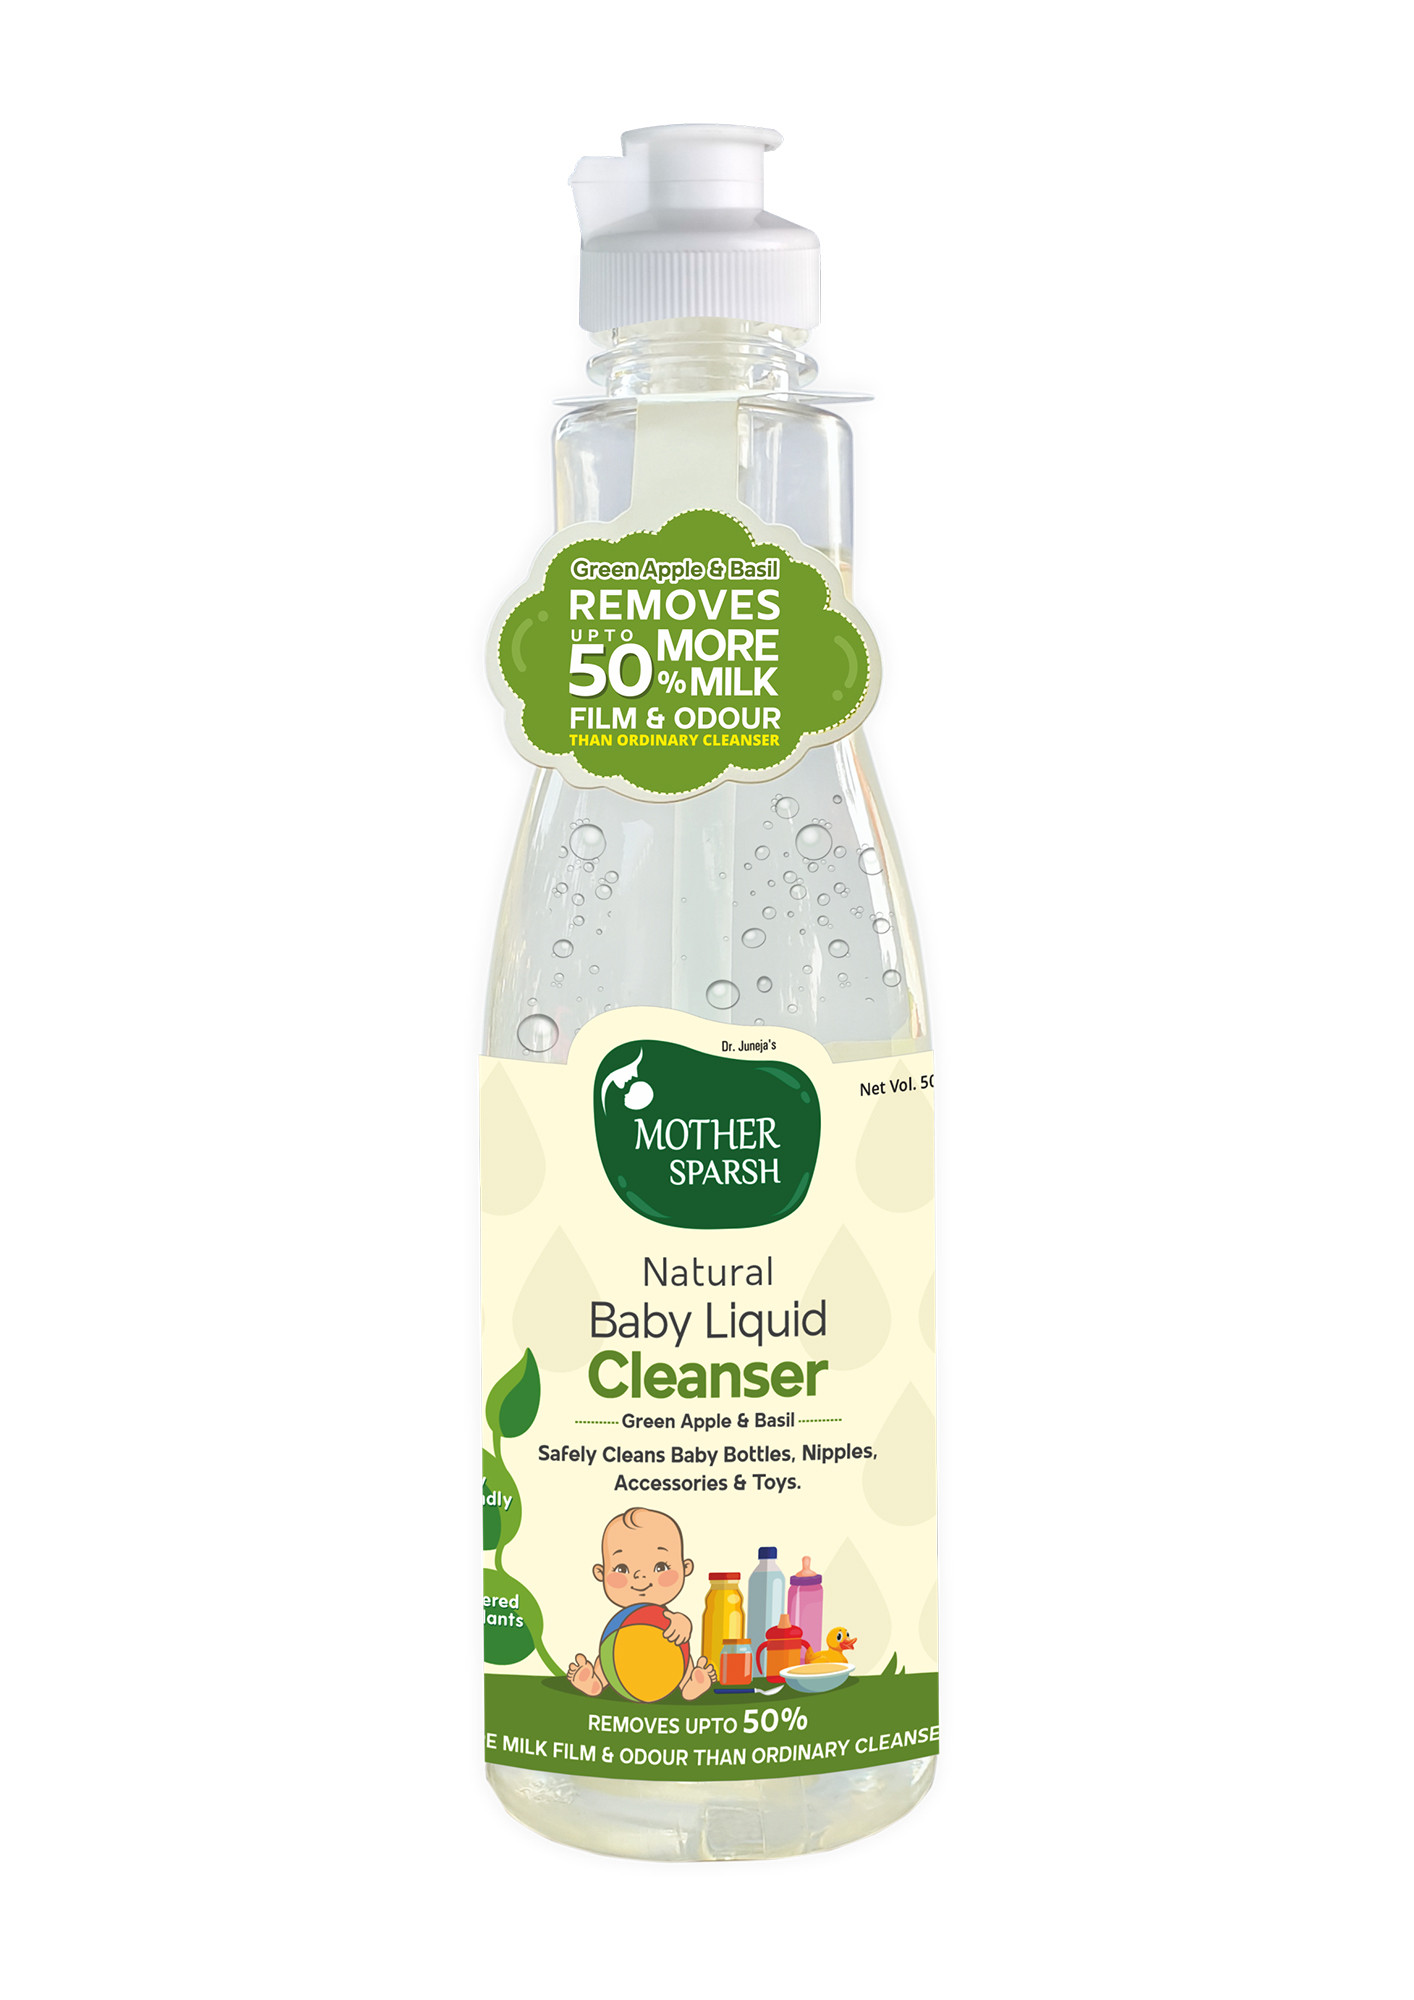 MOTHER SPARSH NATURAL BABY LIQUID CLEANSER (POWERED BY PLANTS) CLEANSER FOR BABY BOTTLES, NIPPLES, ACCESSORIES AND TOYS, 500ML